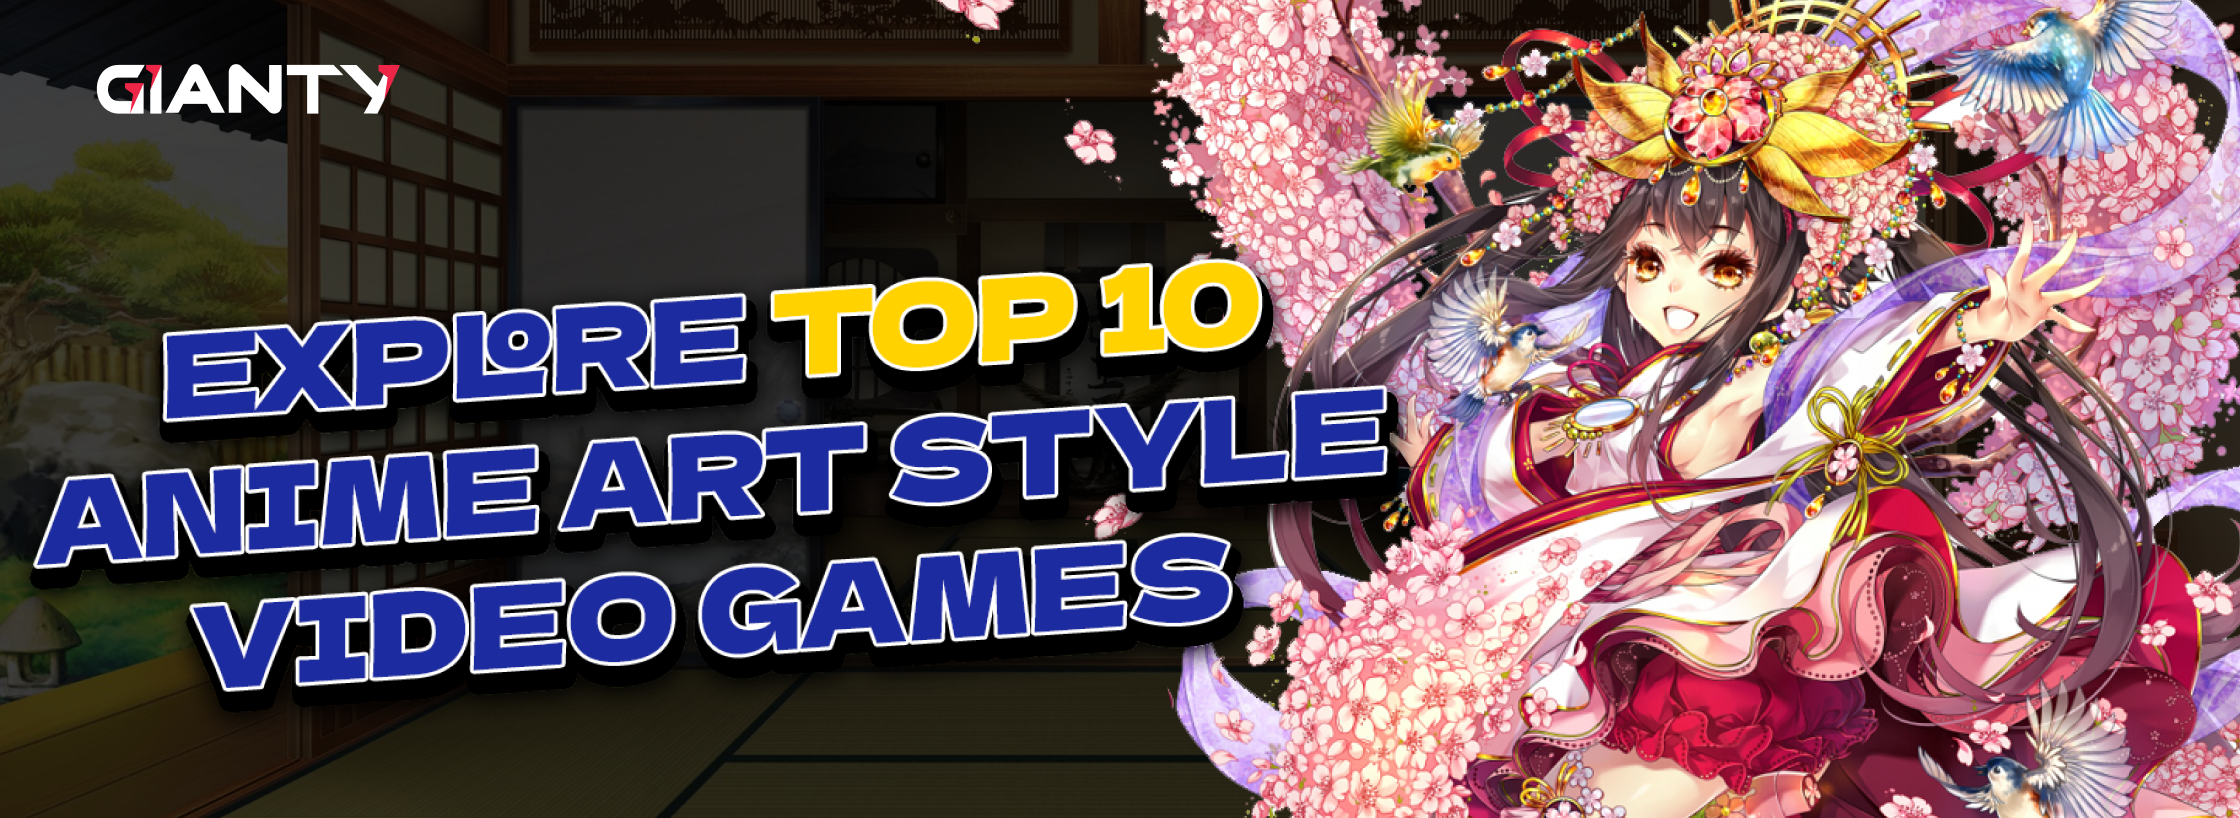 Explore the Top 10 Anime Art Style Video Games